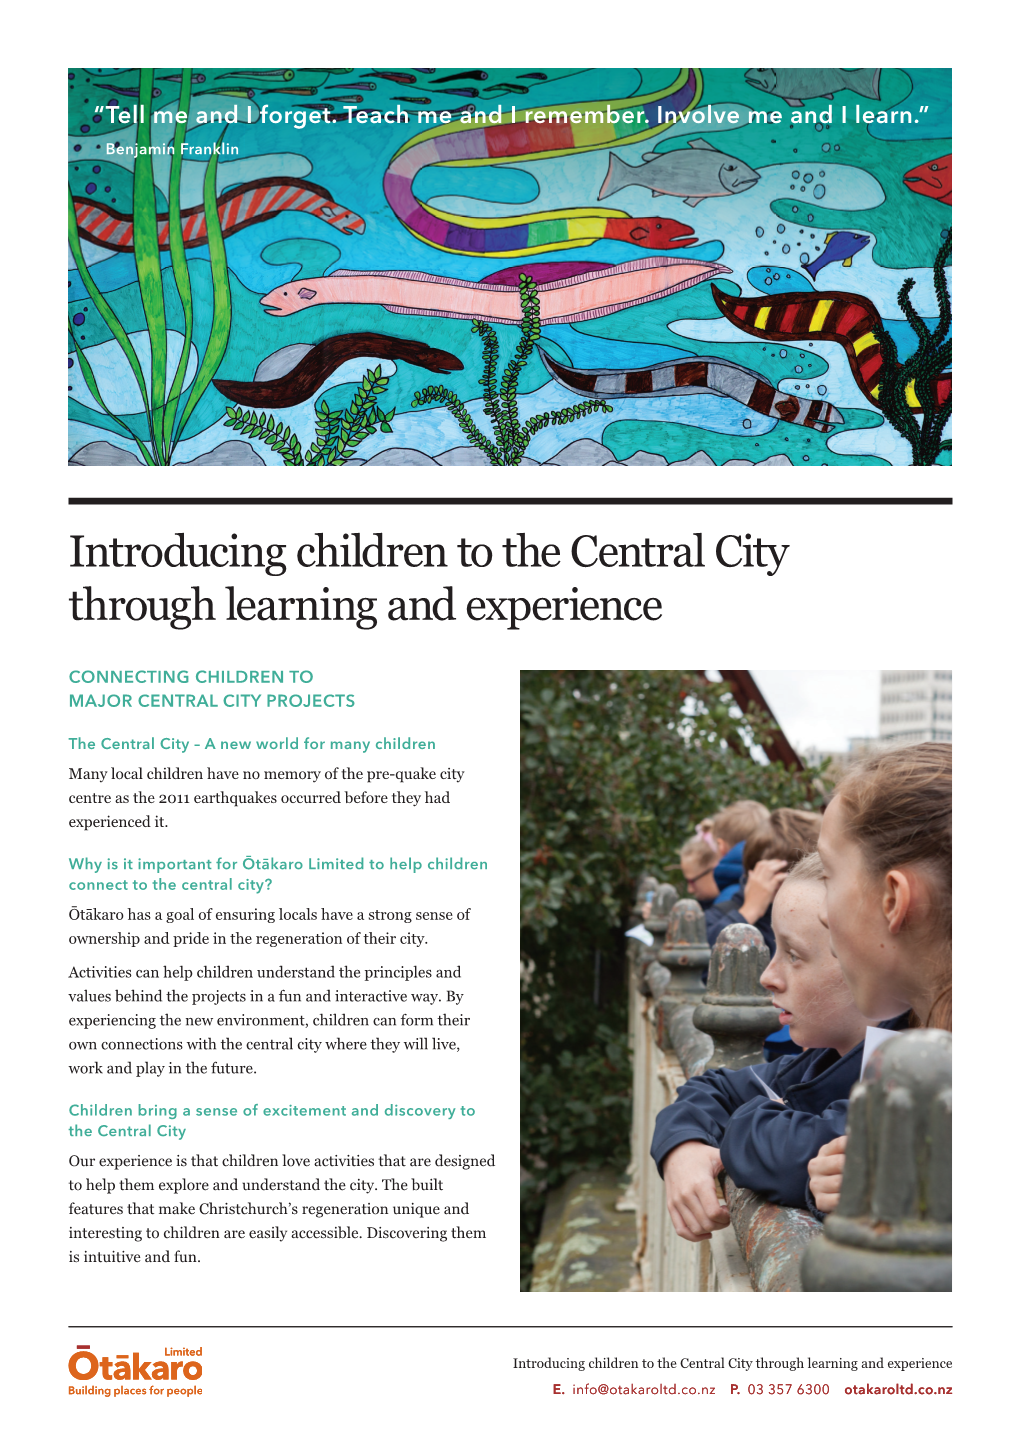 Introducing Children to the Central City Through Learning and Experience